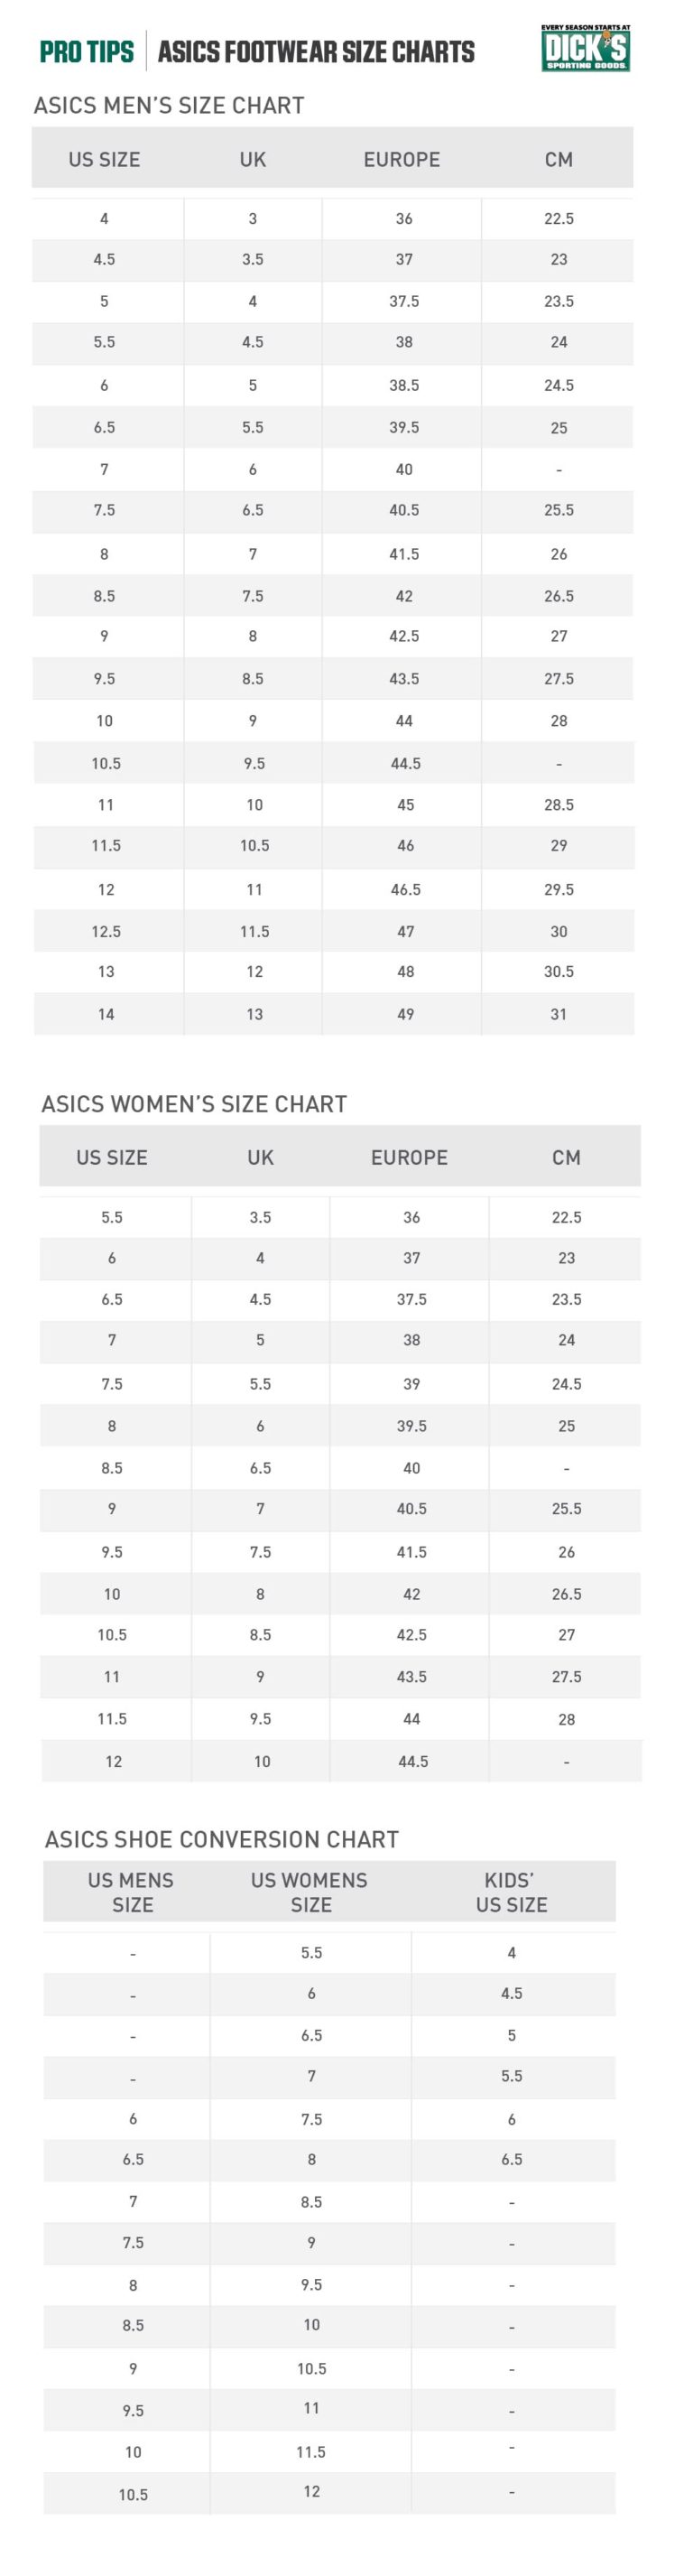 asics-footwear-size-chart-pro-tips-by-dick-s-sporting-goods